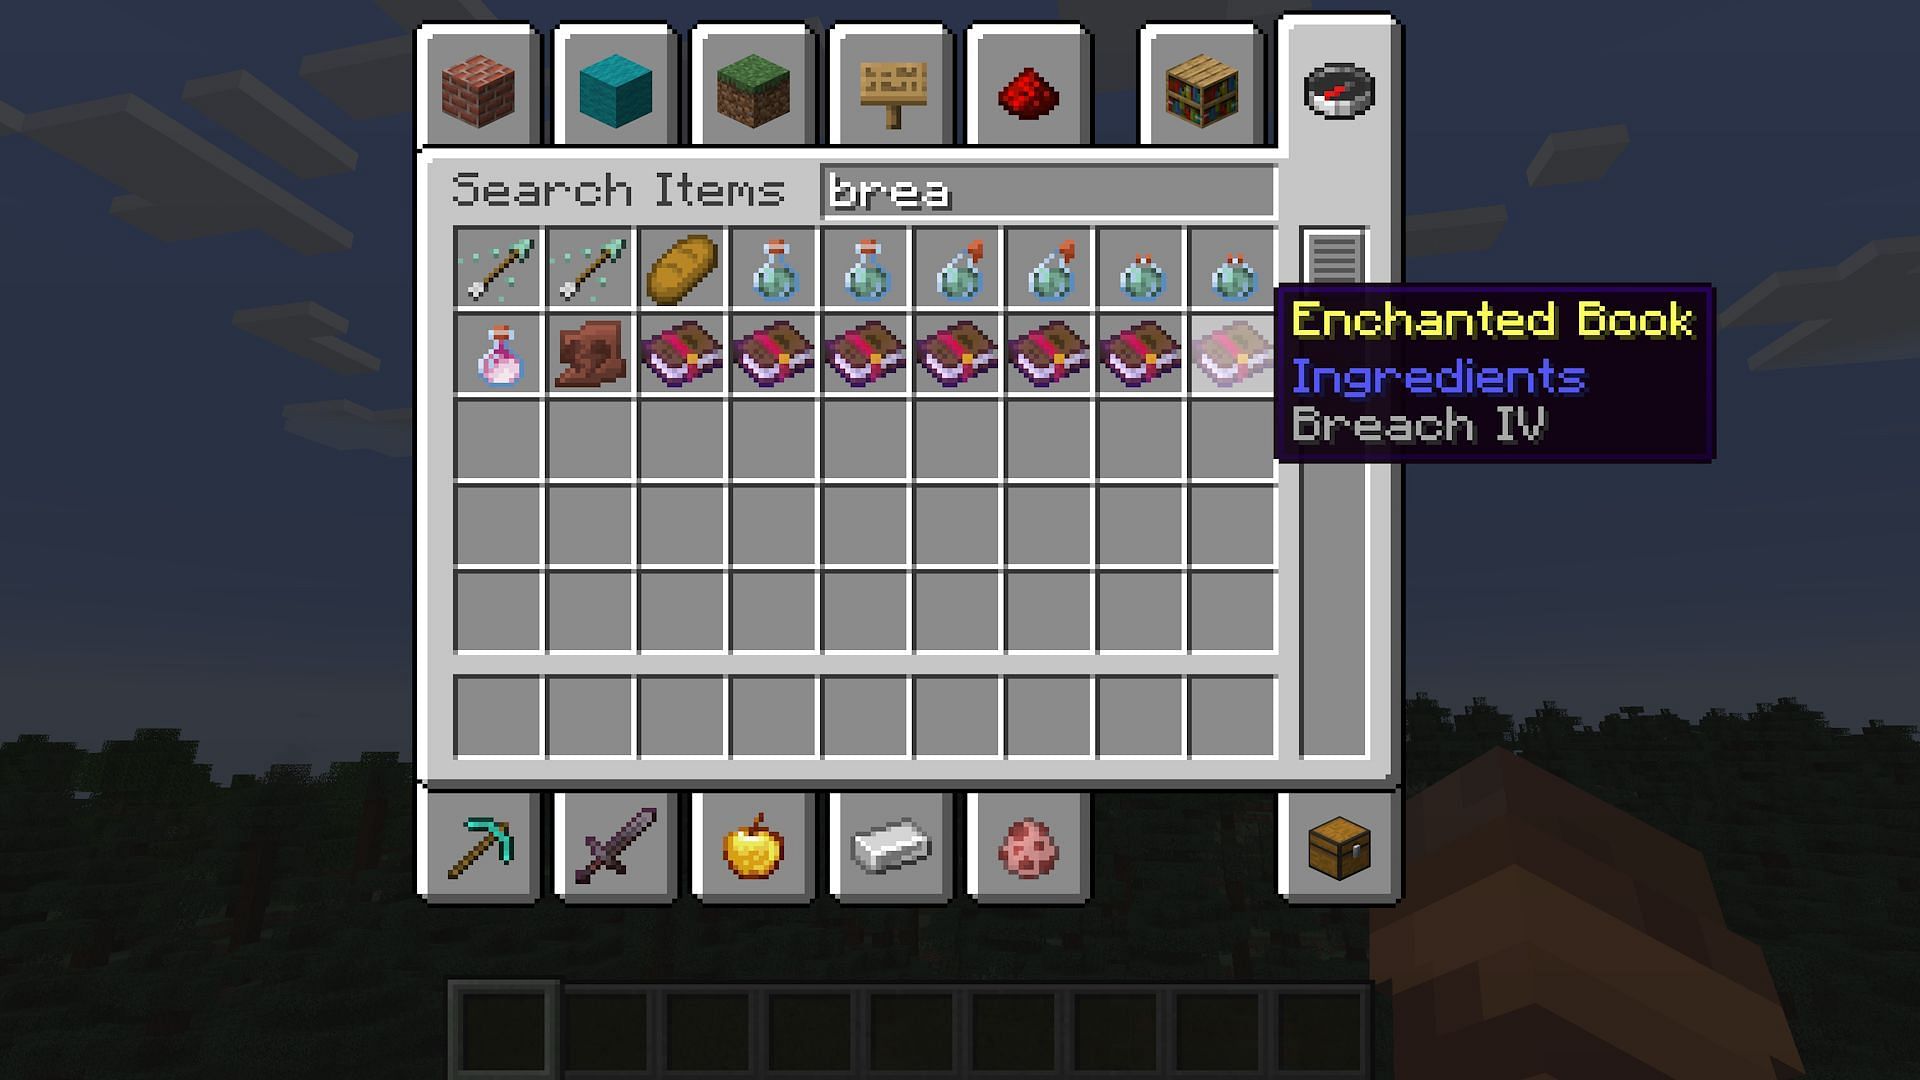 Creative is the quickest and easiest way to test the snapshot (Image via Mojang)